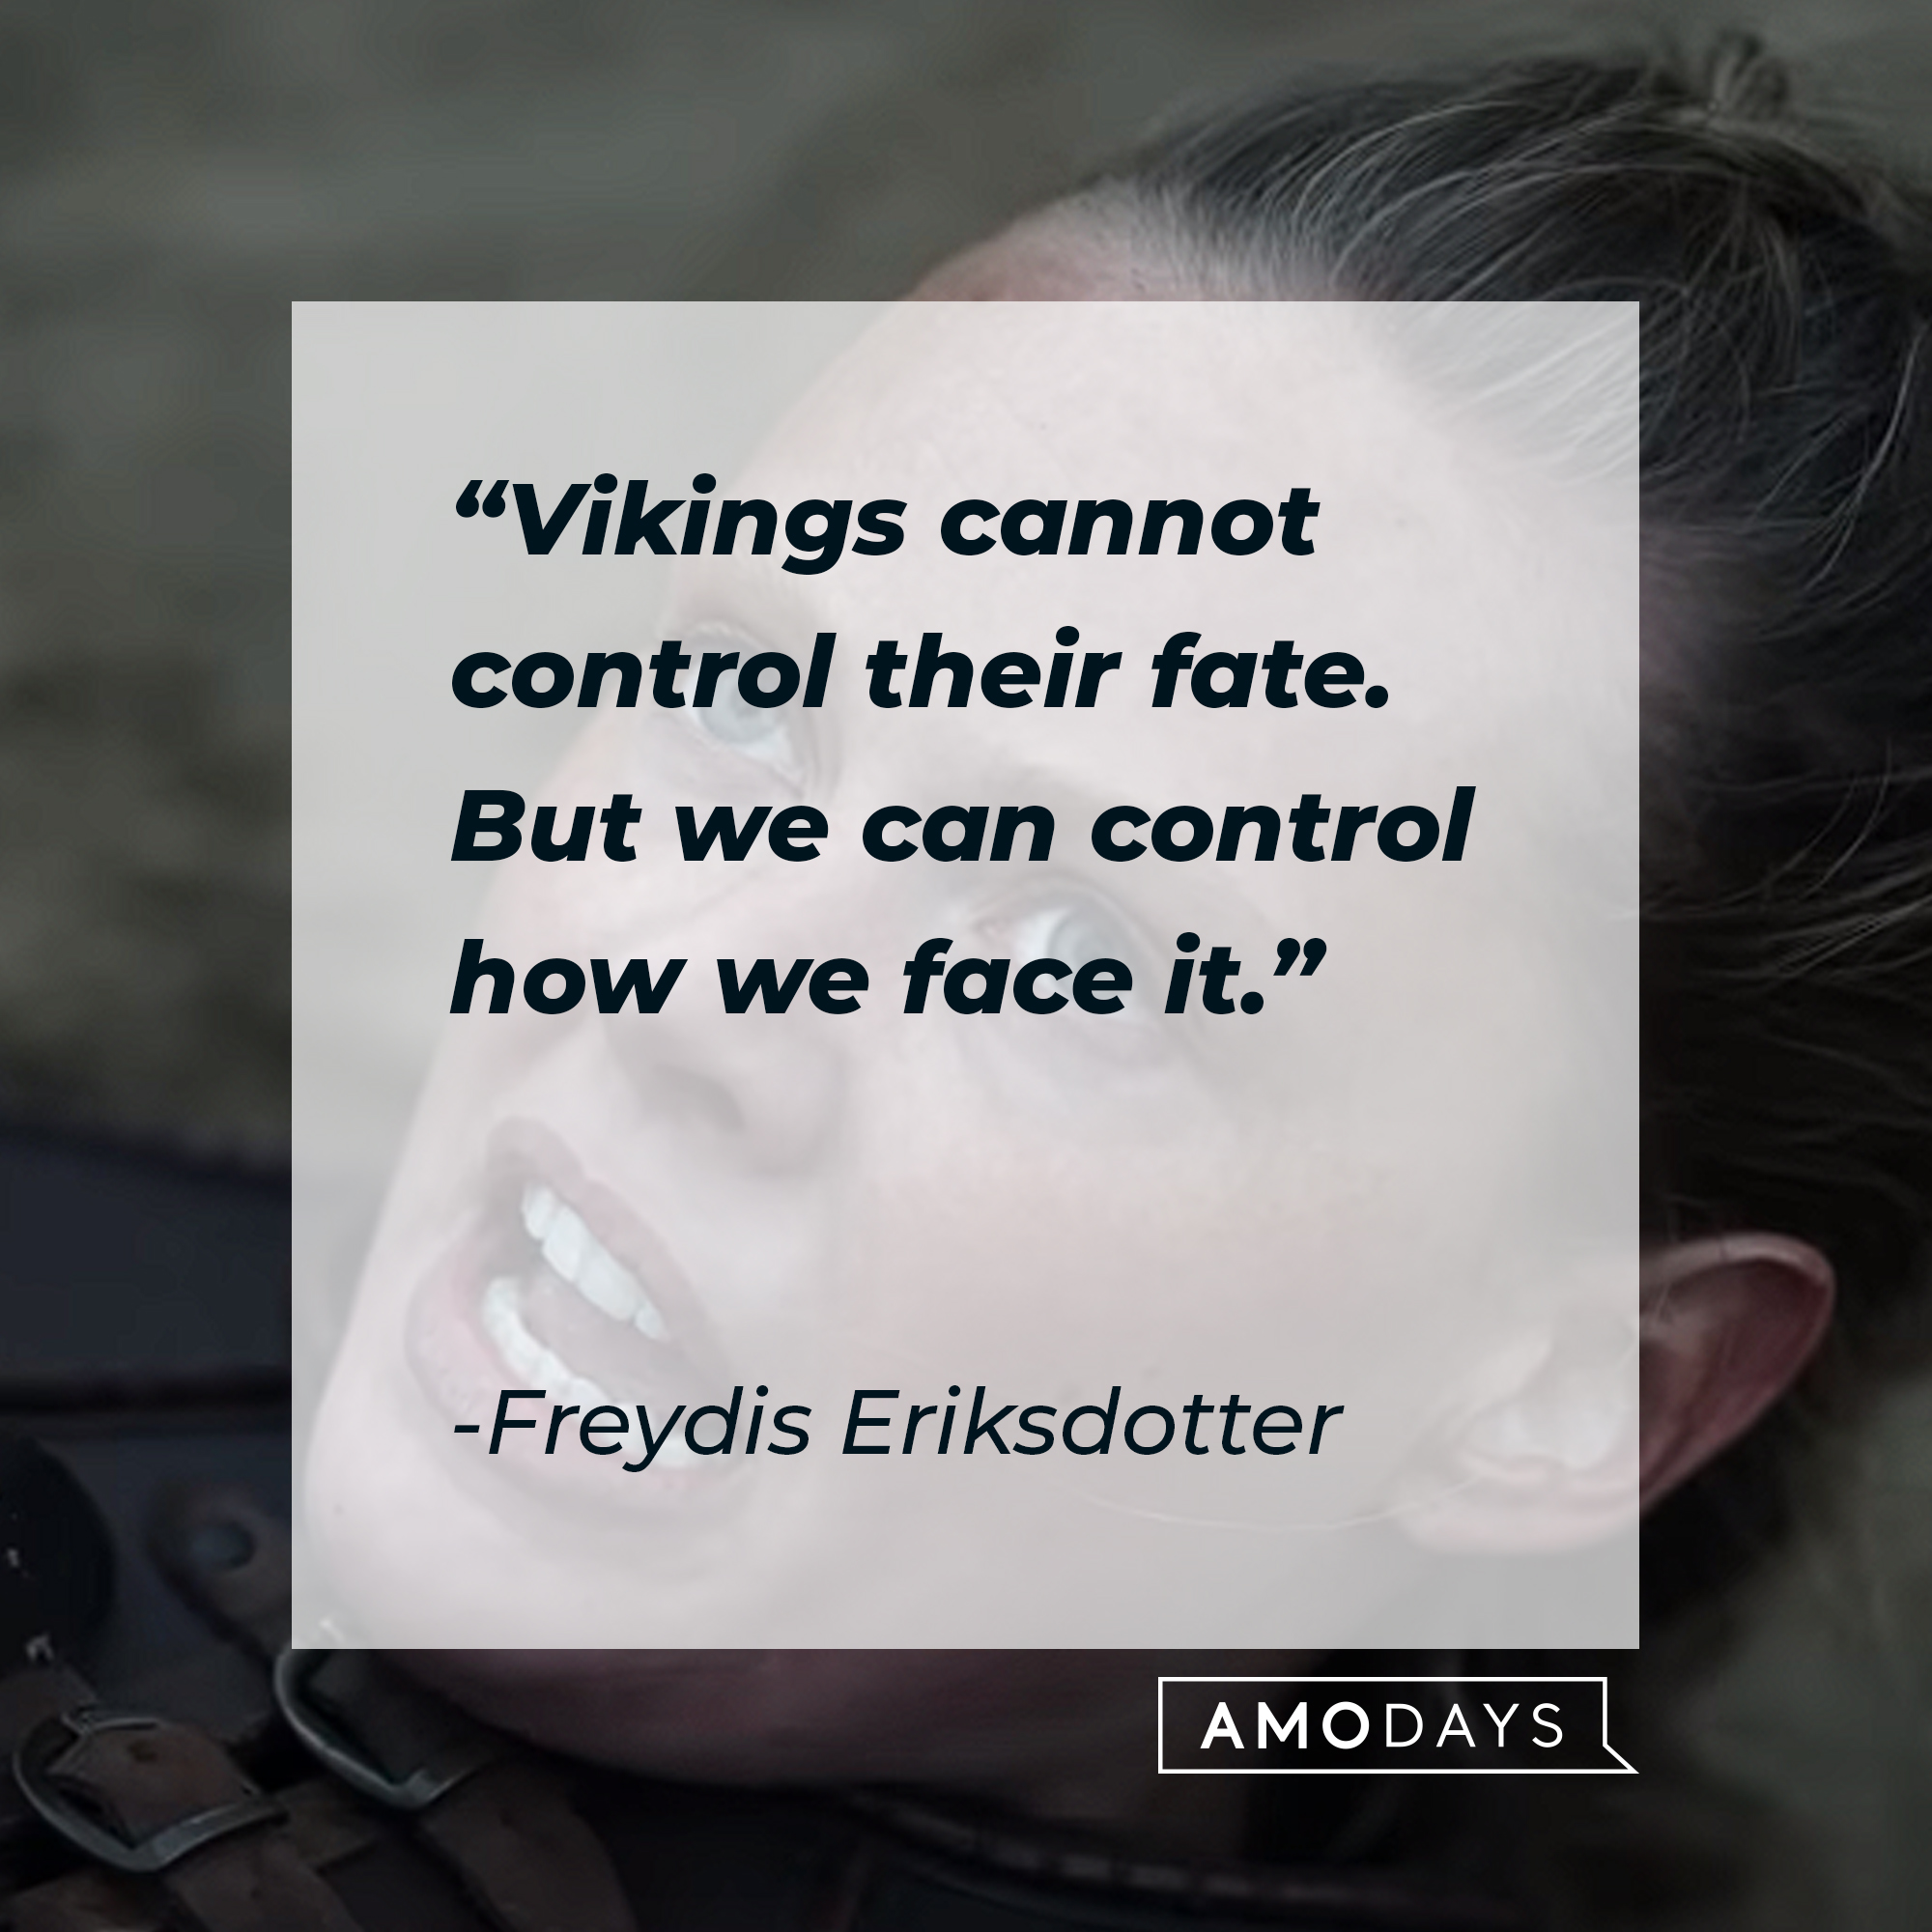 A picture of Freydis Eriksdotter with her quote: “Vikings cannot control their fate. But we can control how we face it.” | Source: youtube.com/Netflix